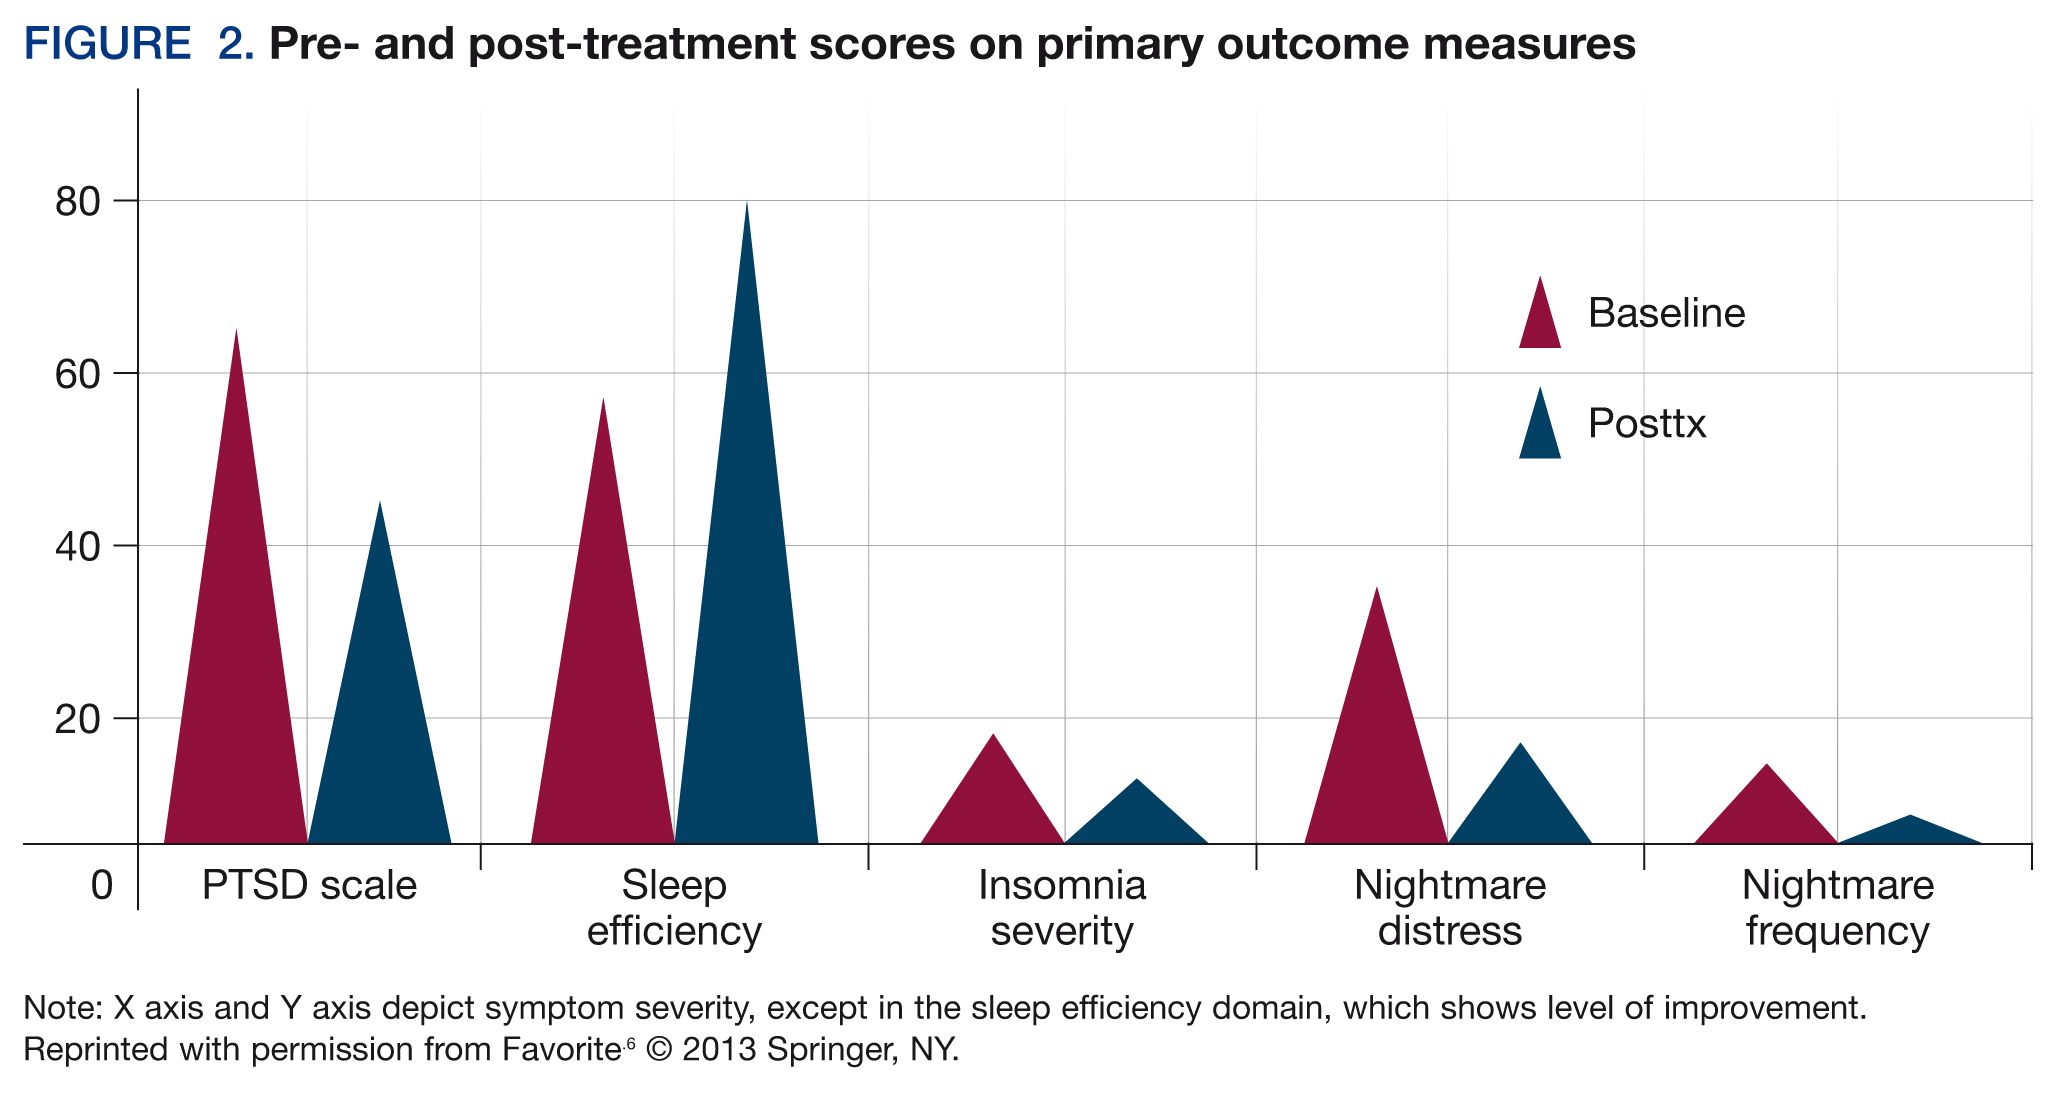 Pre- and post-treatment scores on primary outcome measures